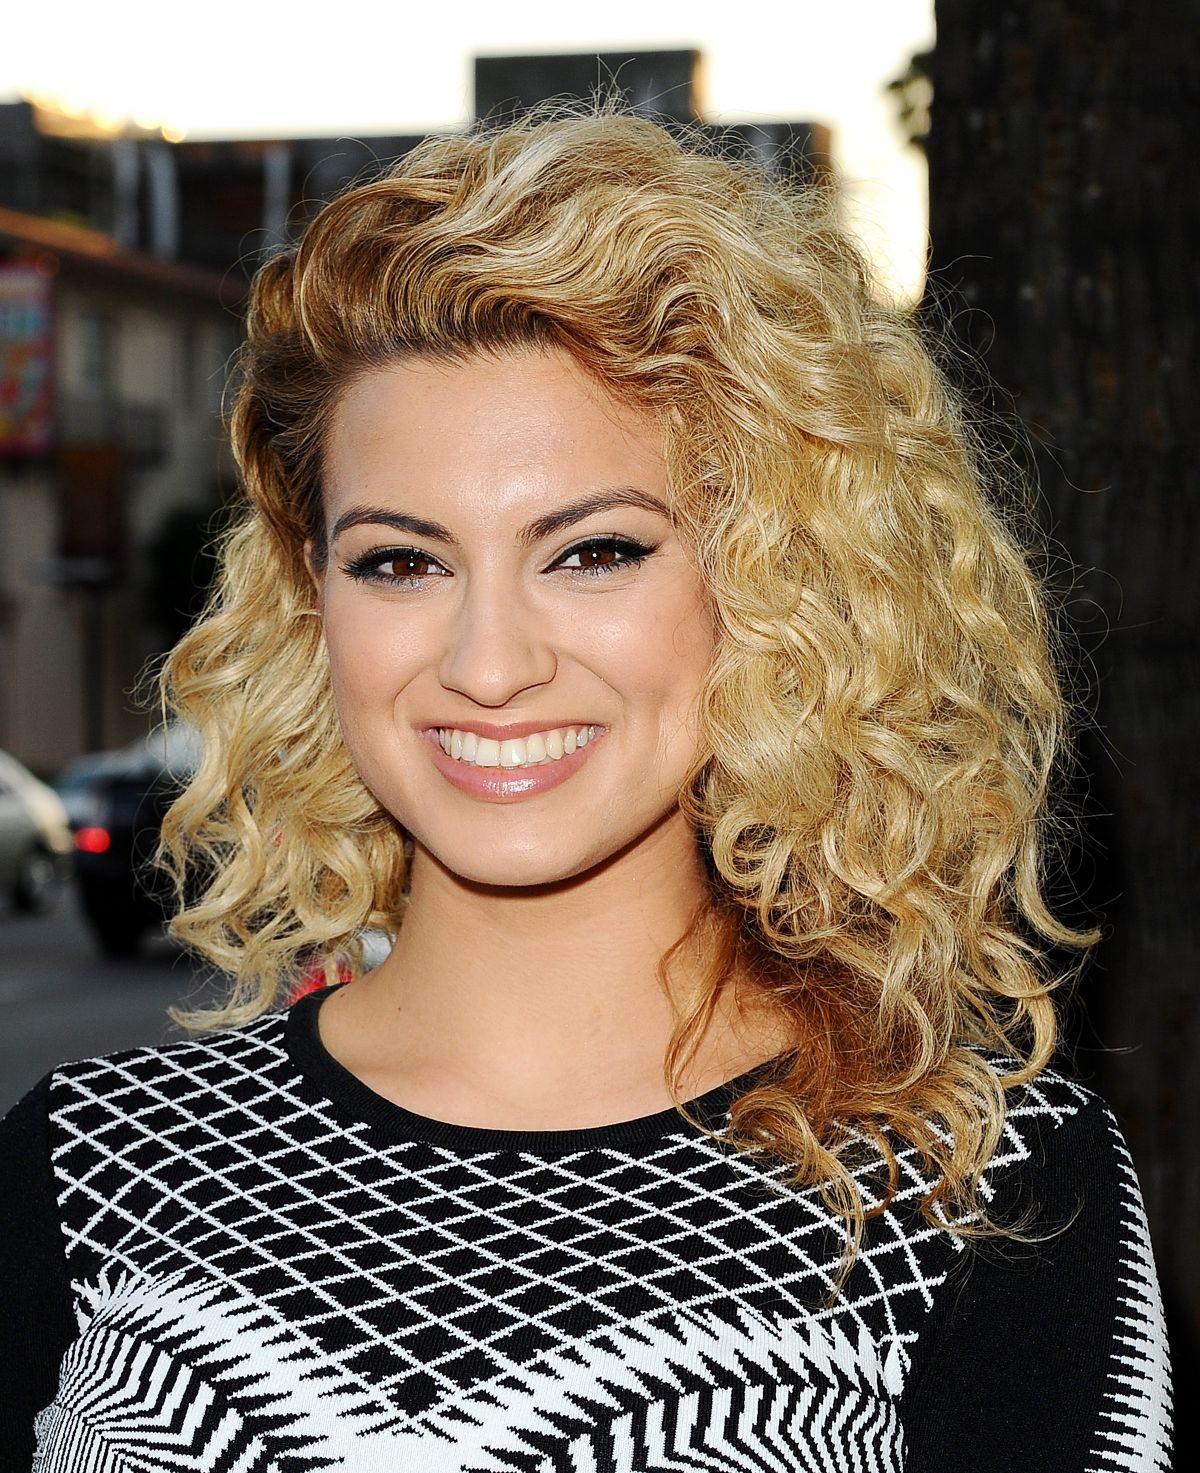 tori-kelly-at-elle-women-in-music-2015-in-hollywood_24.